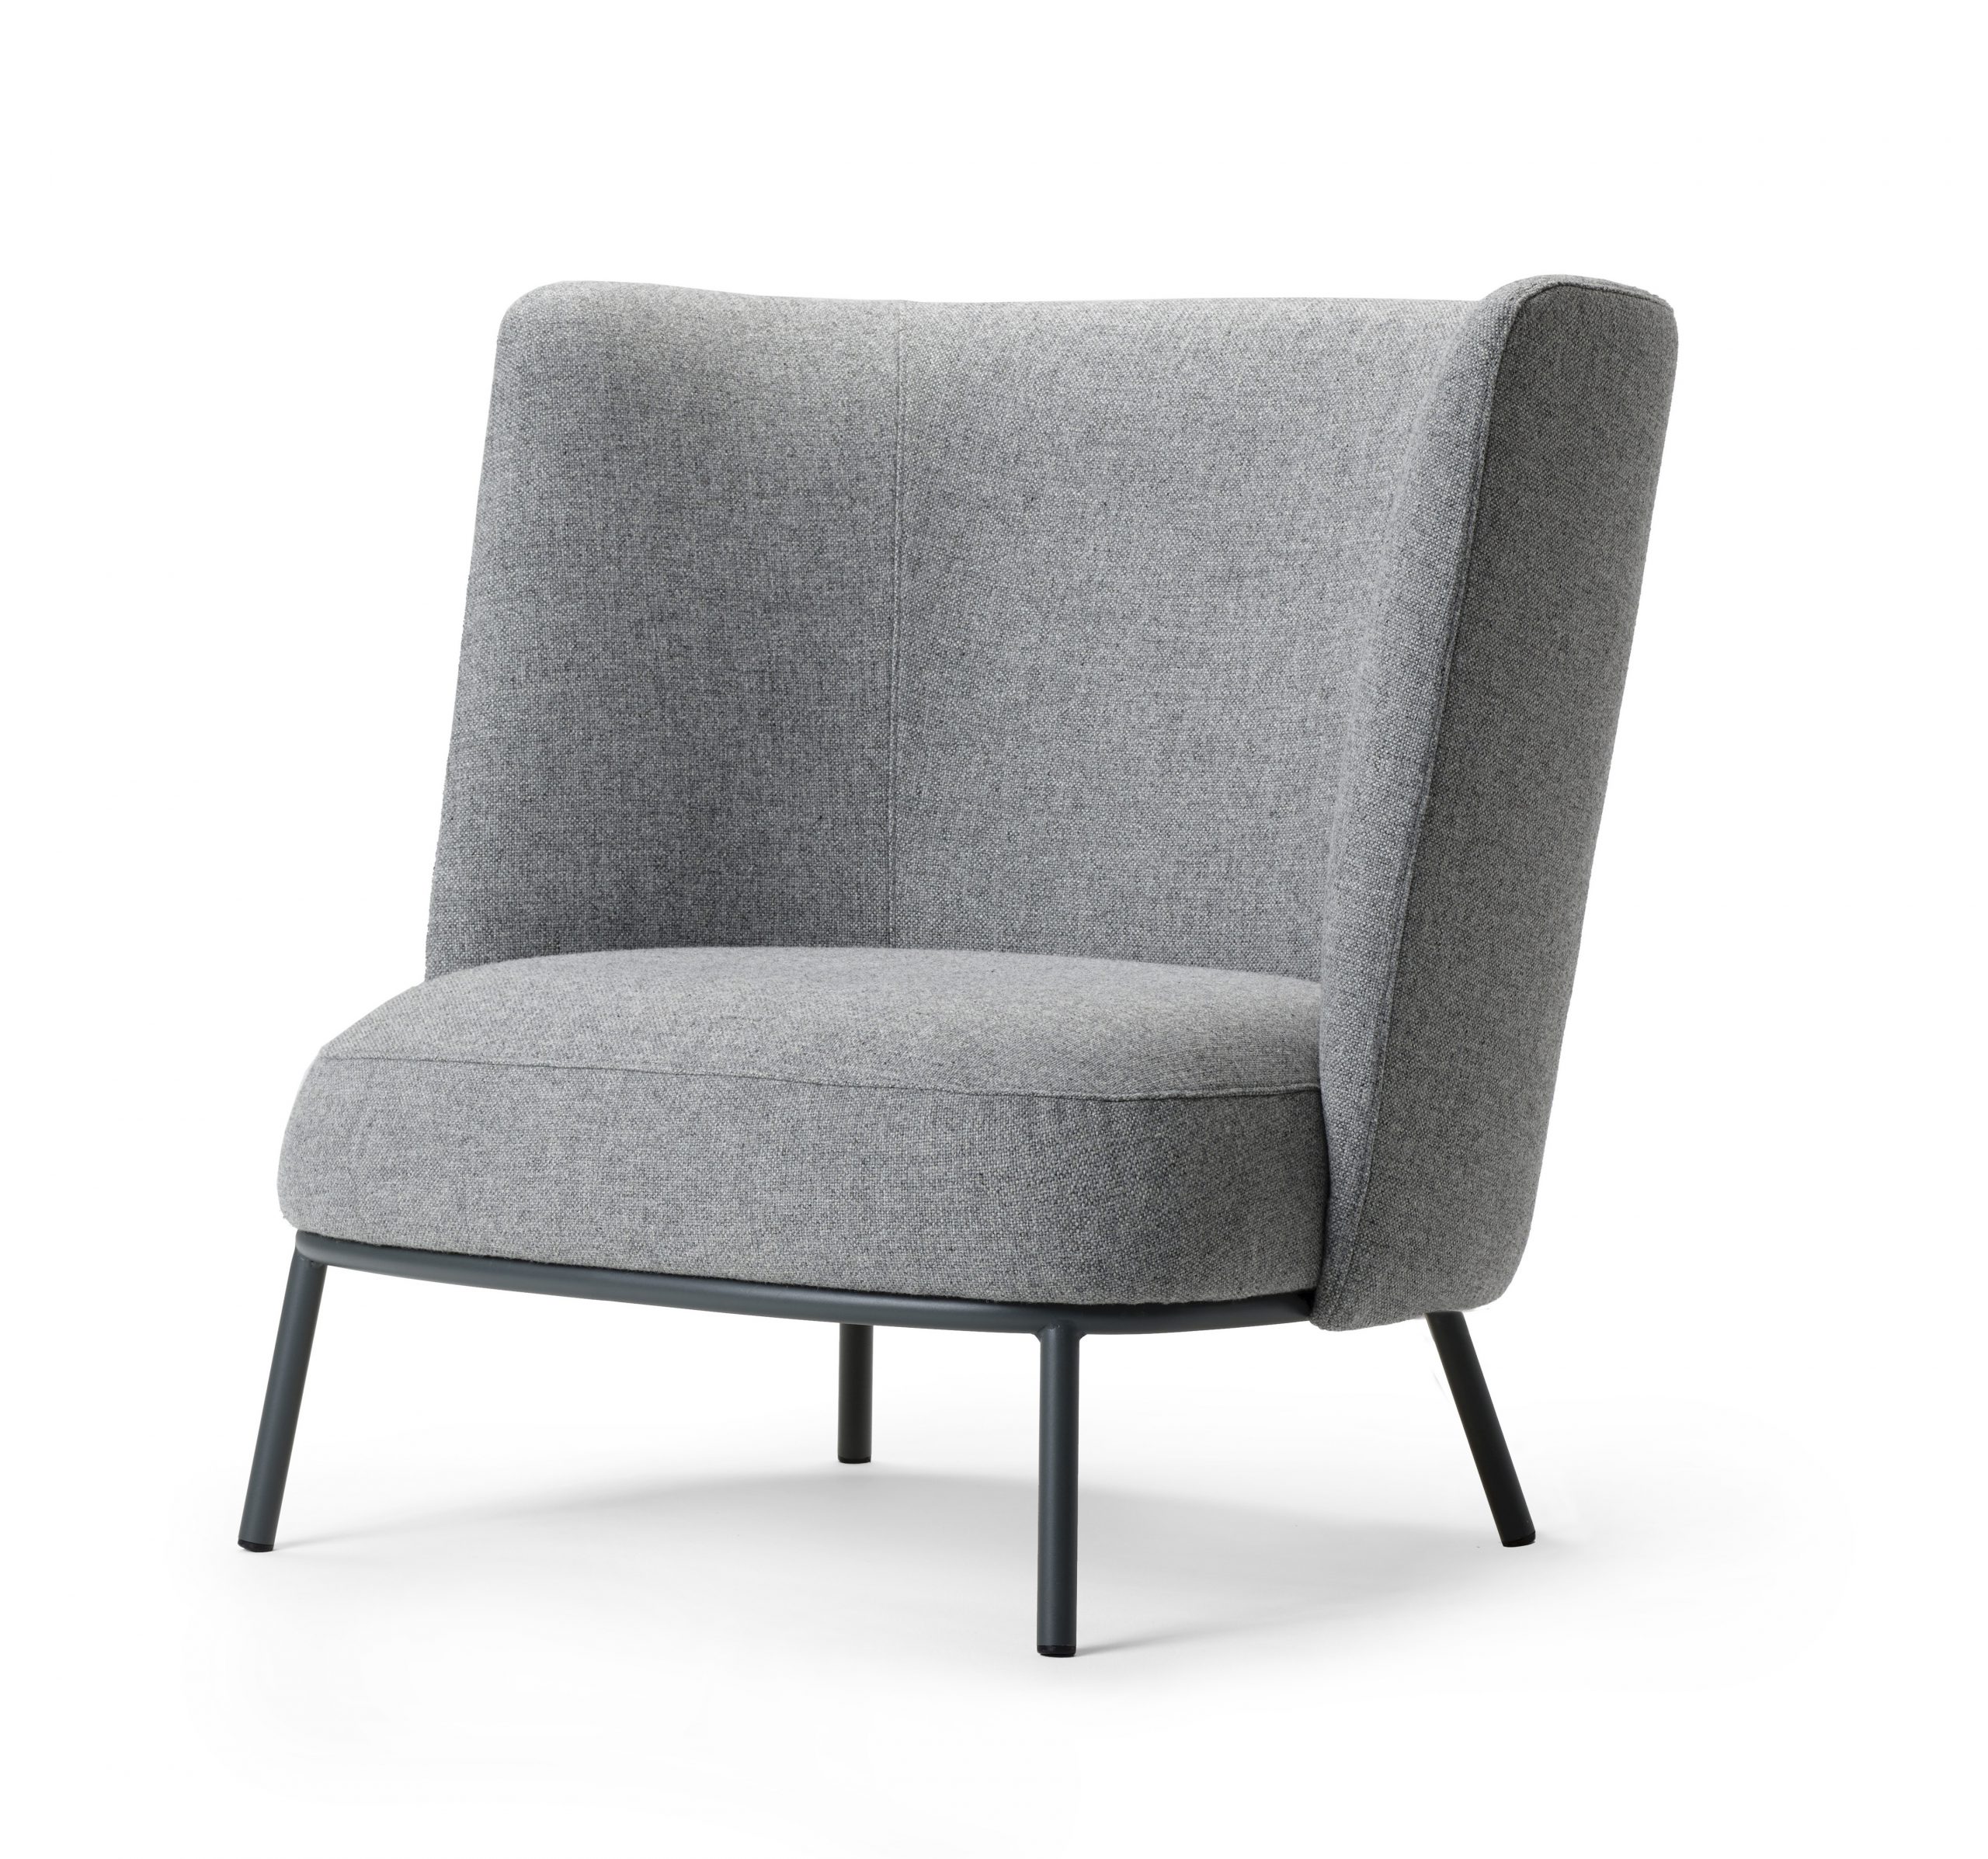 Shift easychair high by Debiasi Sandri for Offecct